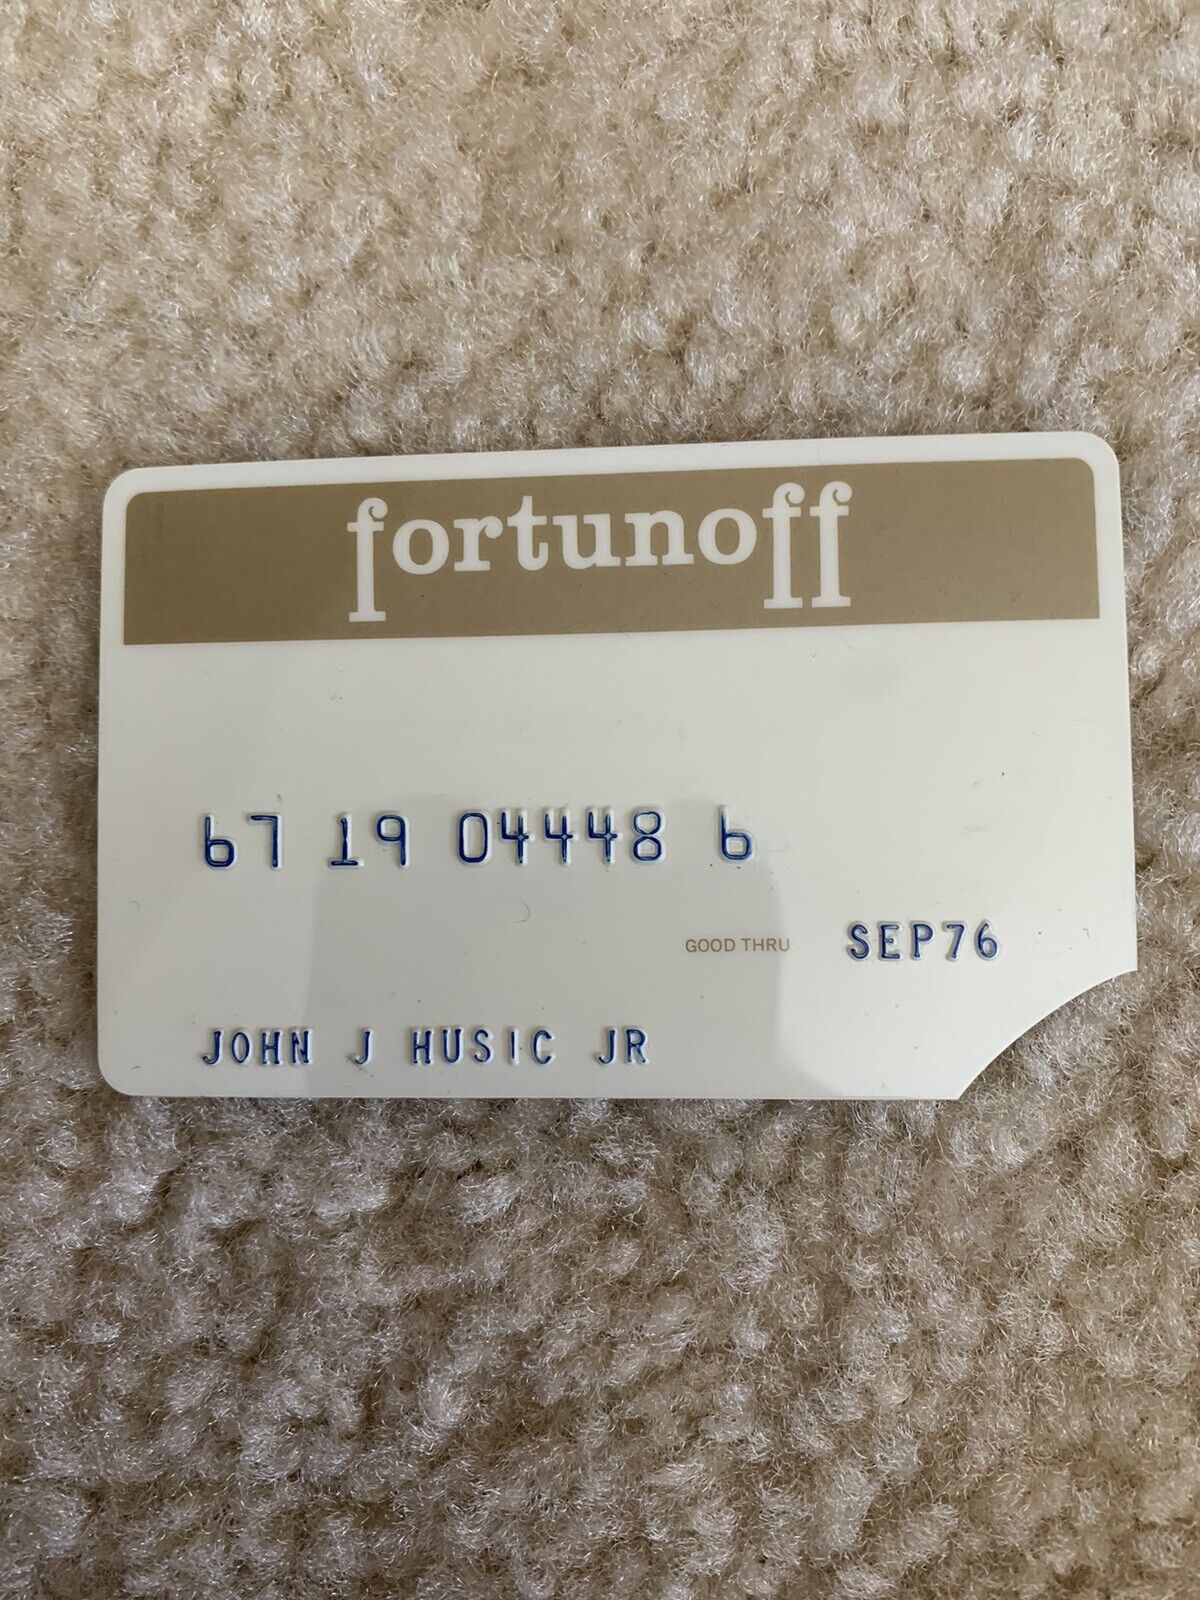 Vintage Fortunoff Credit Card Expired in 9/76